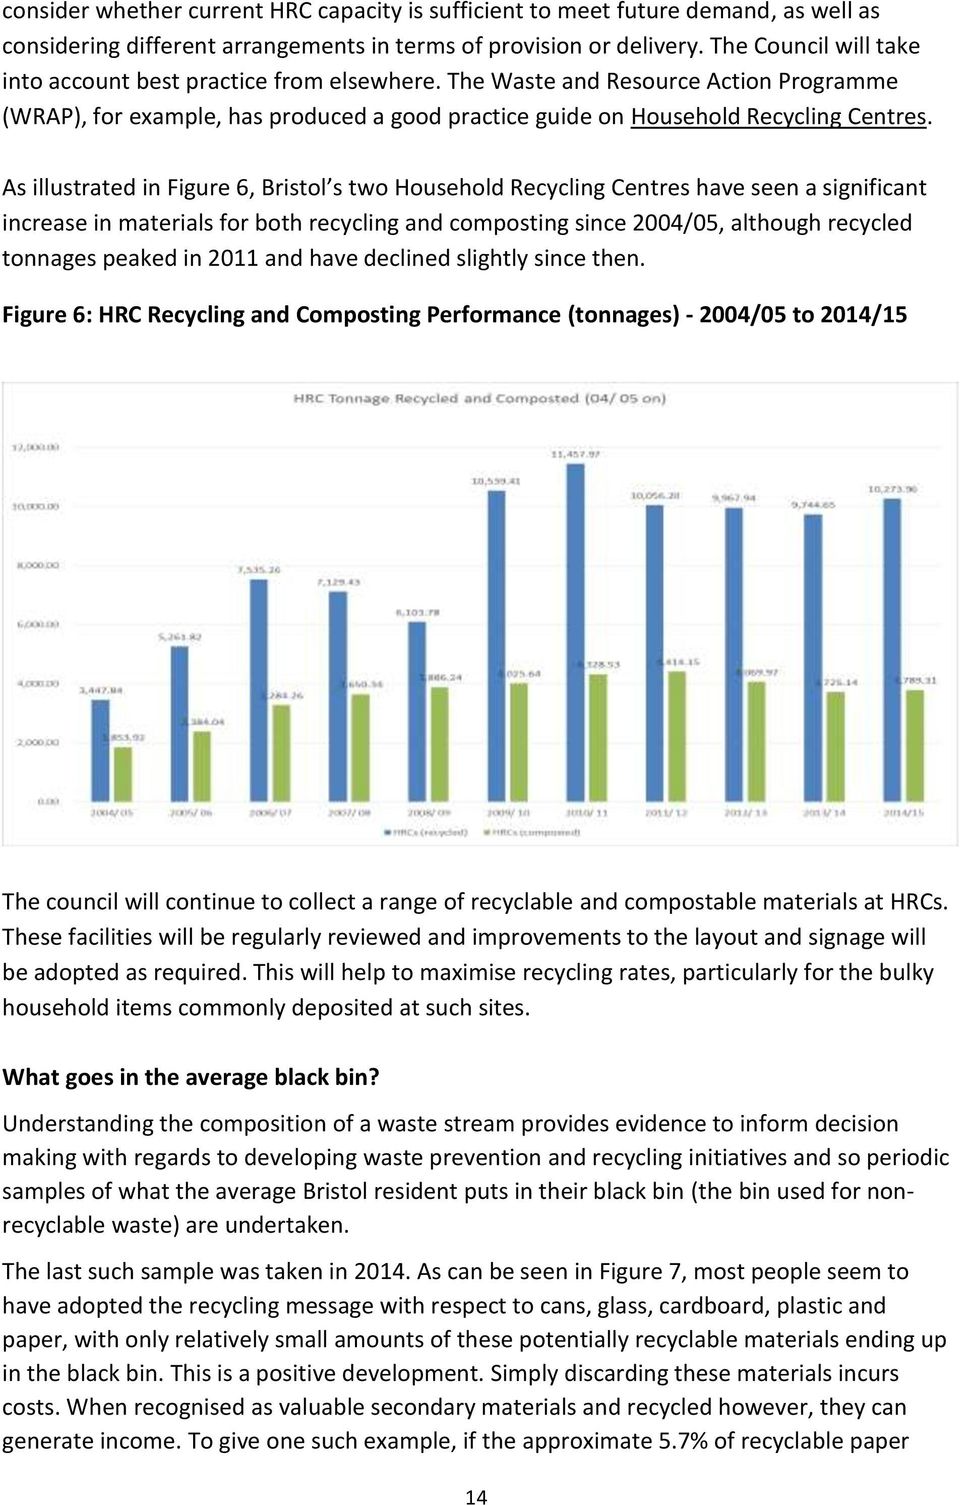 As illustrated in Figure 6, Bristol s two Household Recycling Centres have seen a significant increase in materials for both recycling and composting since 2004/05, although recycled tonnages peaked